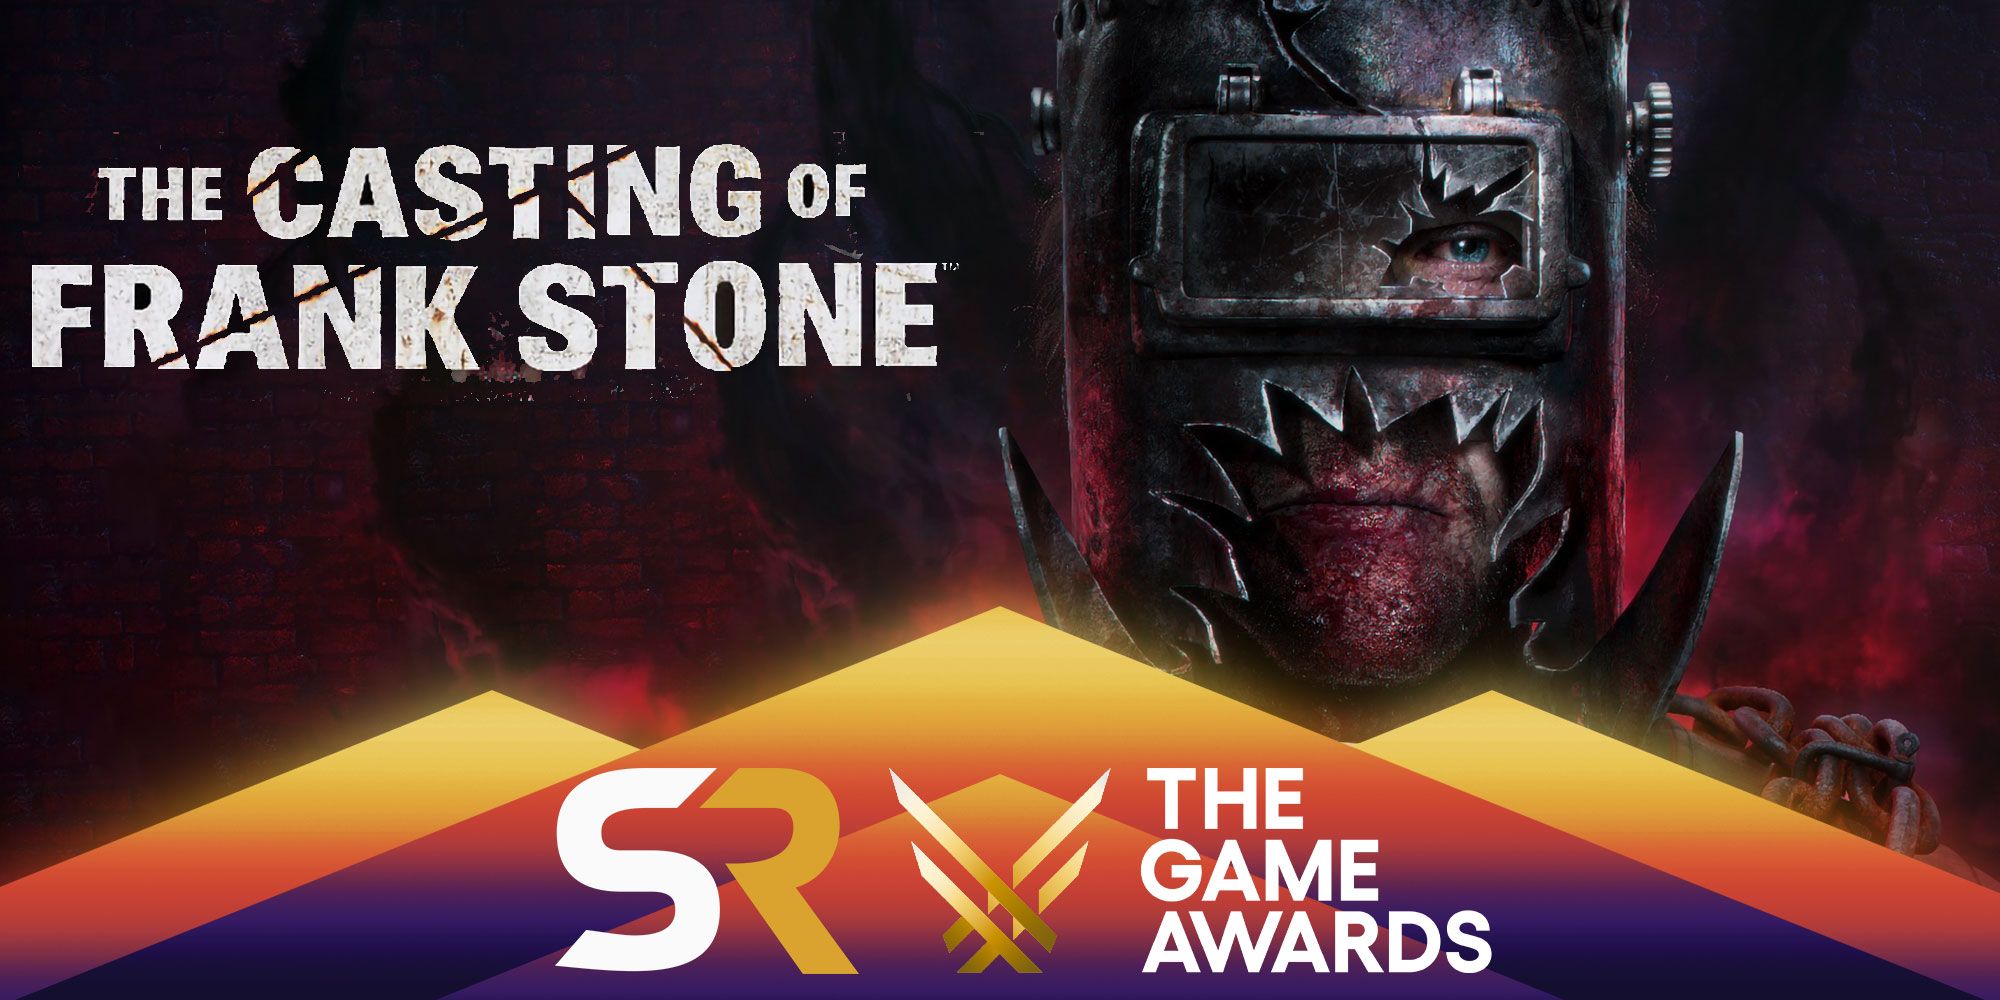 The Casting of Frank Stone with Frank Stone's head and The Game Awards logo. 